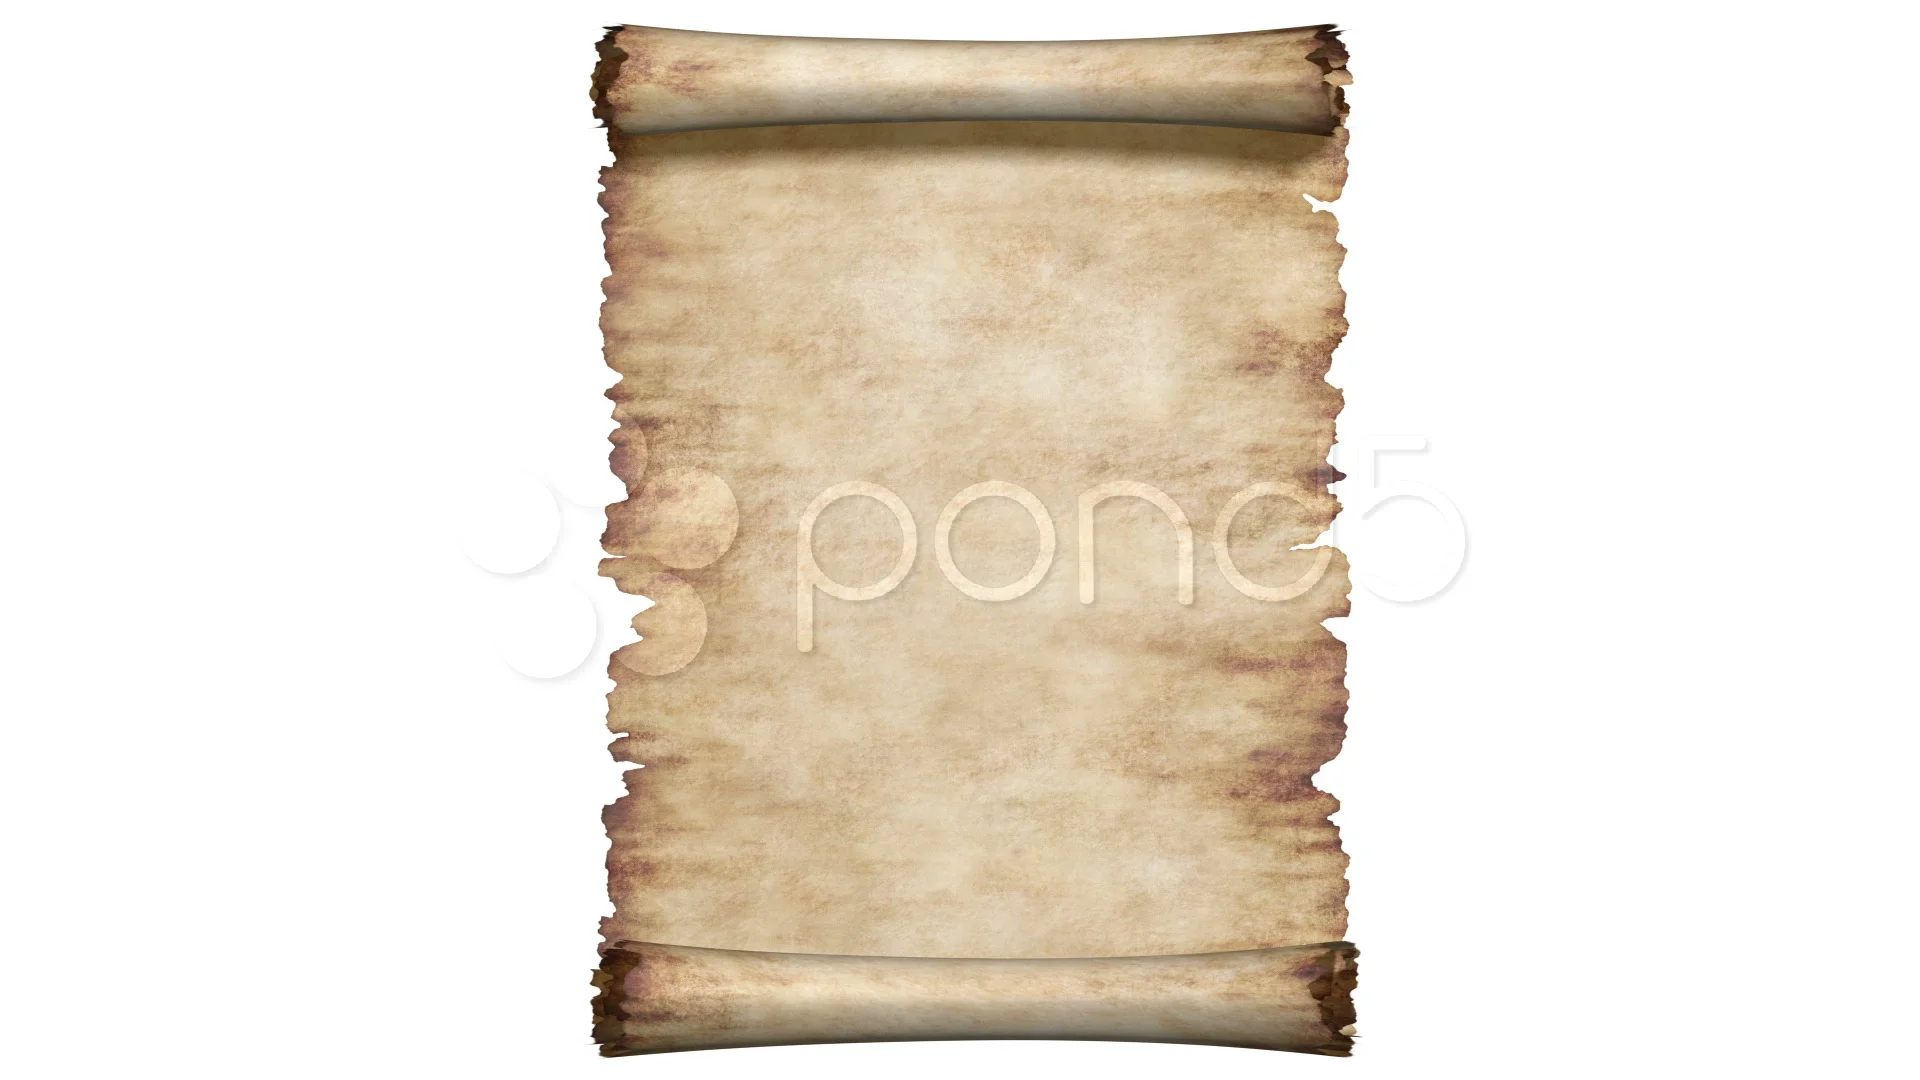 Parchment roll stock image. Image of object, document - 19838533